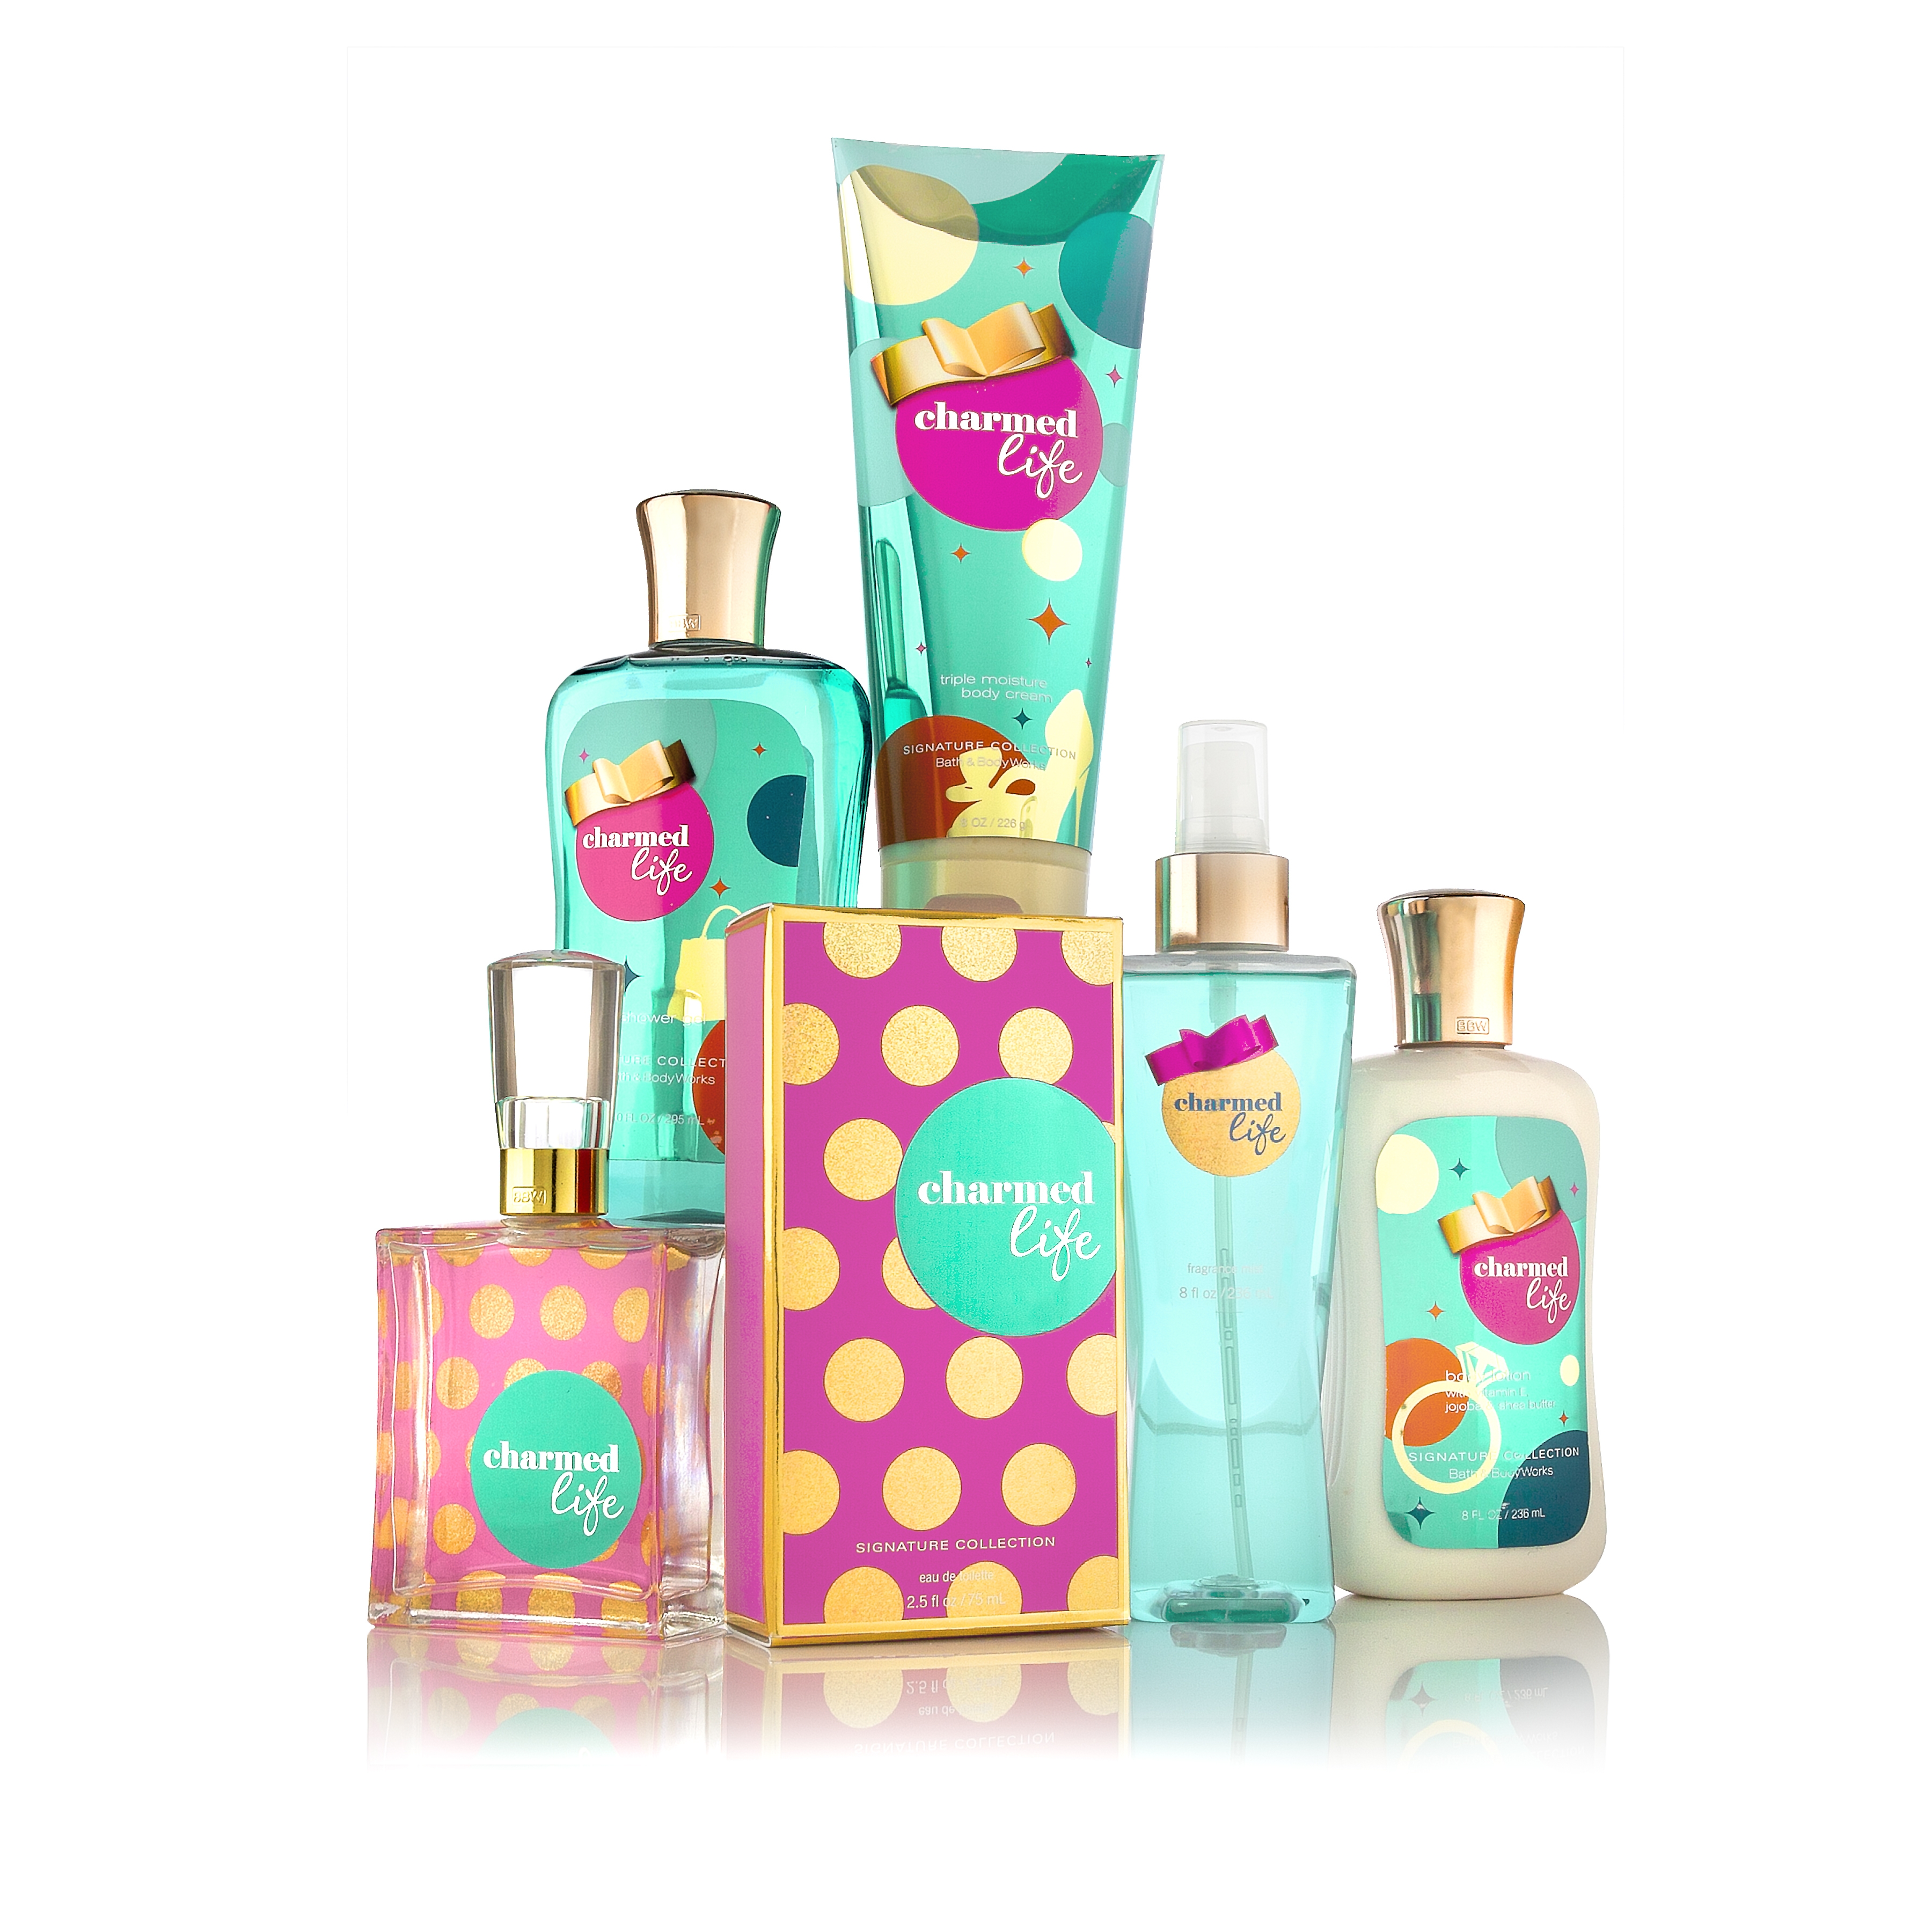 New for Fall 2011 at Bath & Body Works:  Charmed Life